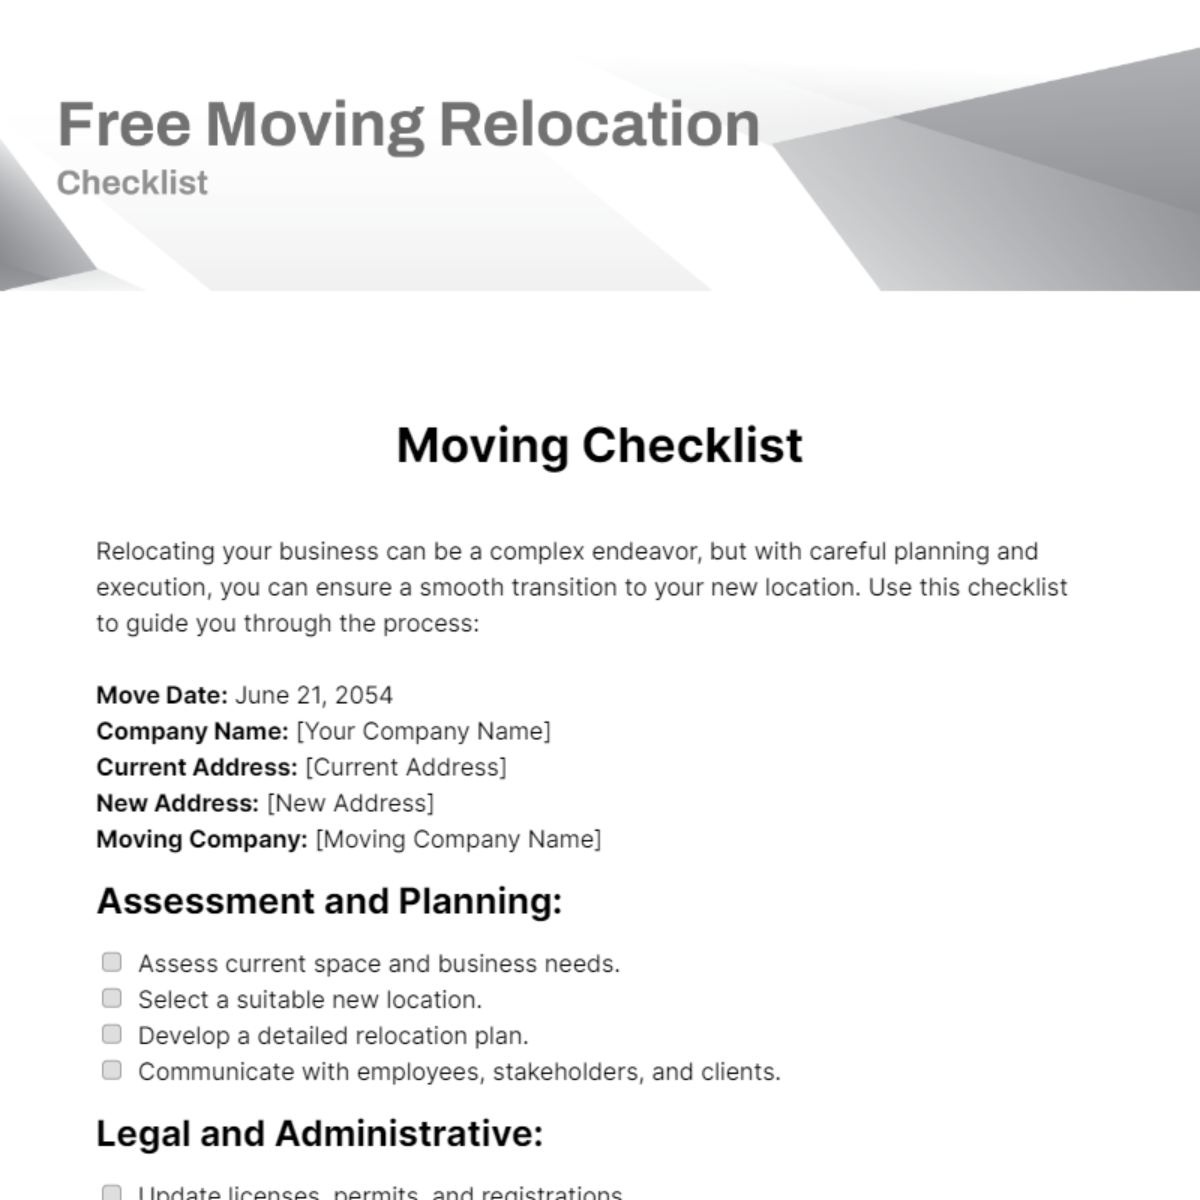 Free Moving Relocation Checklist Template